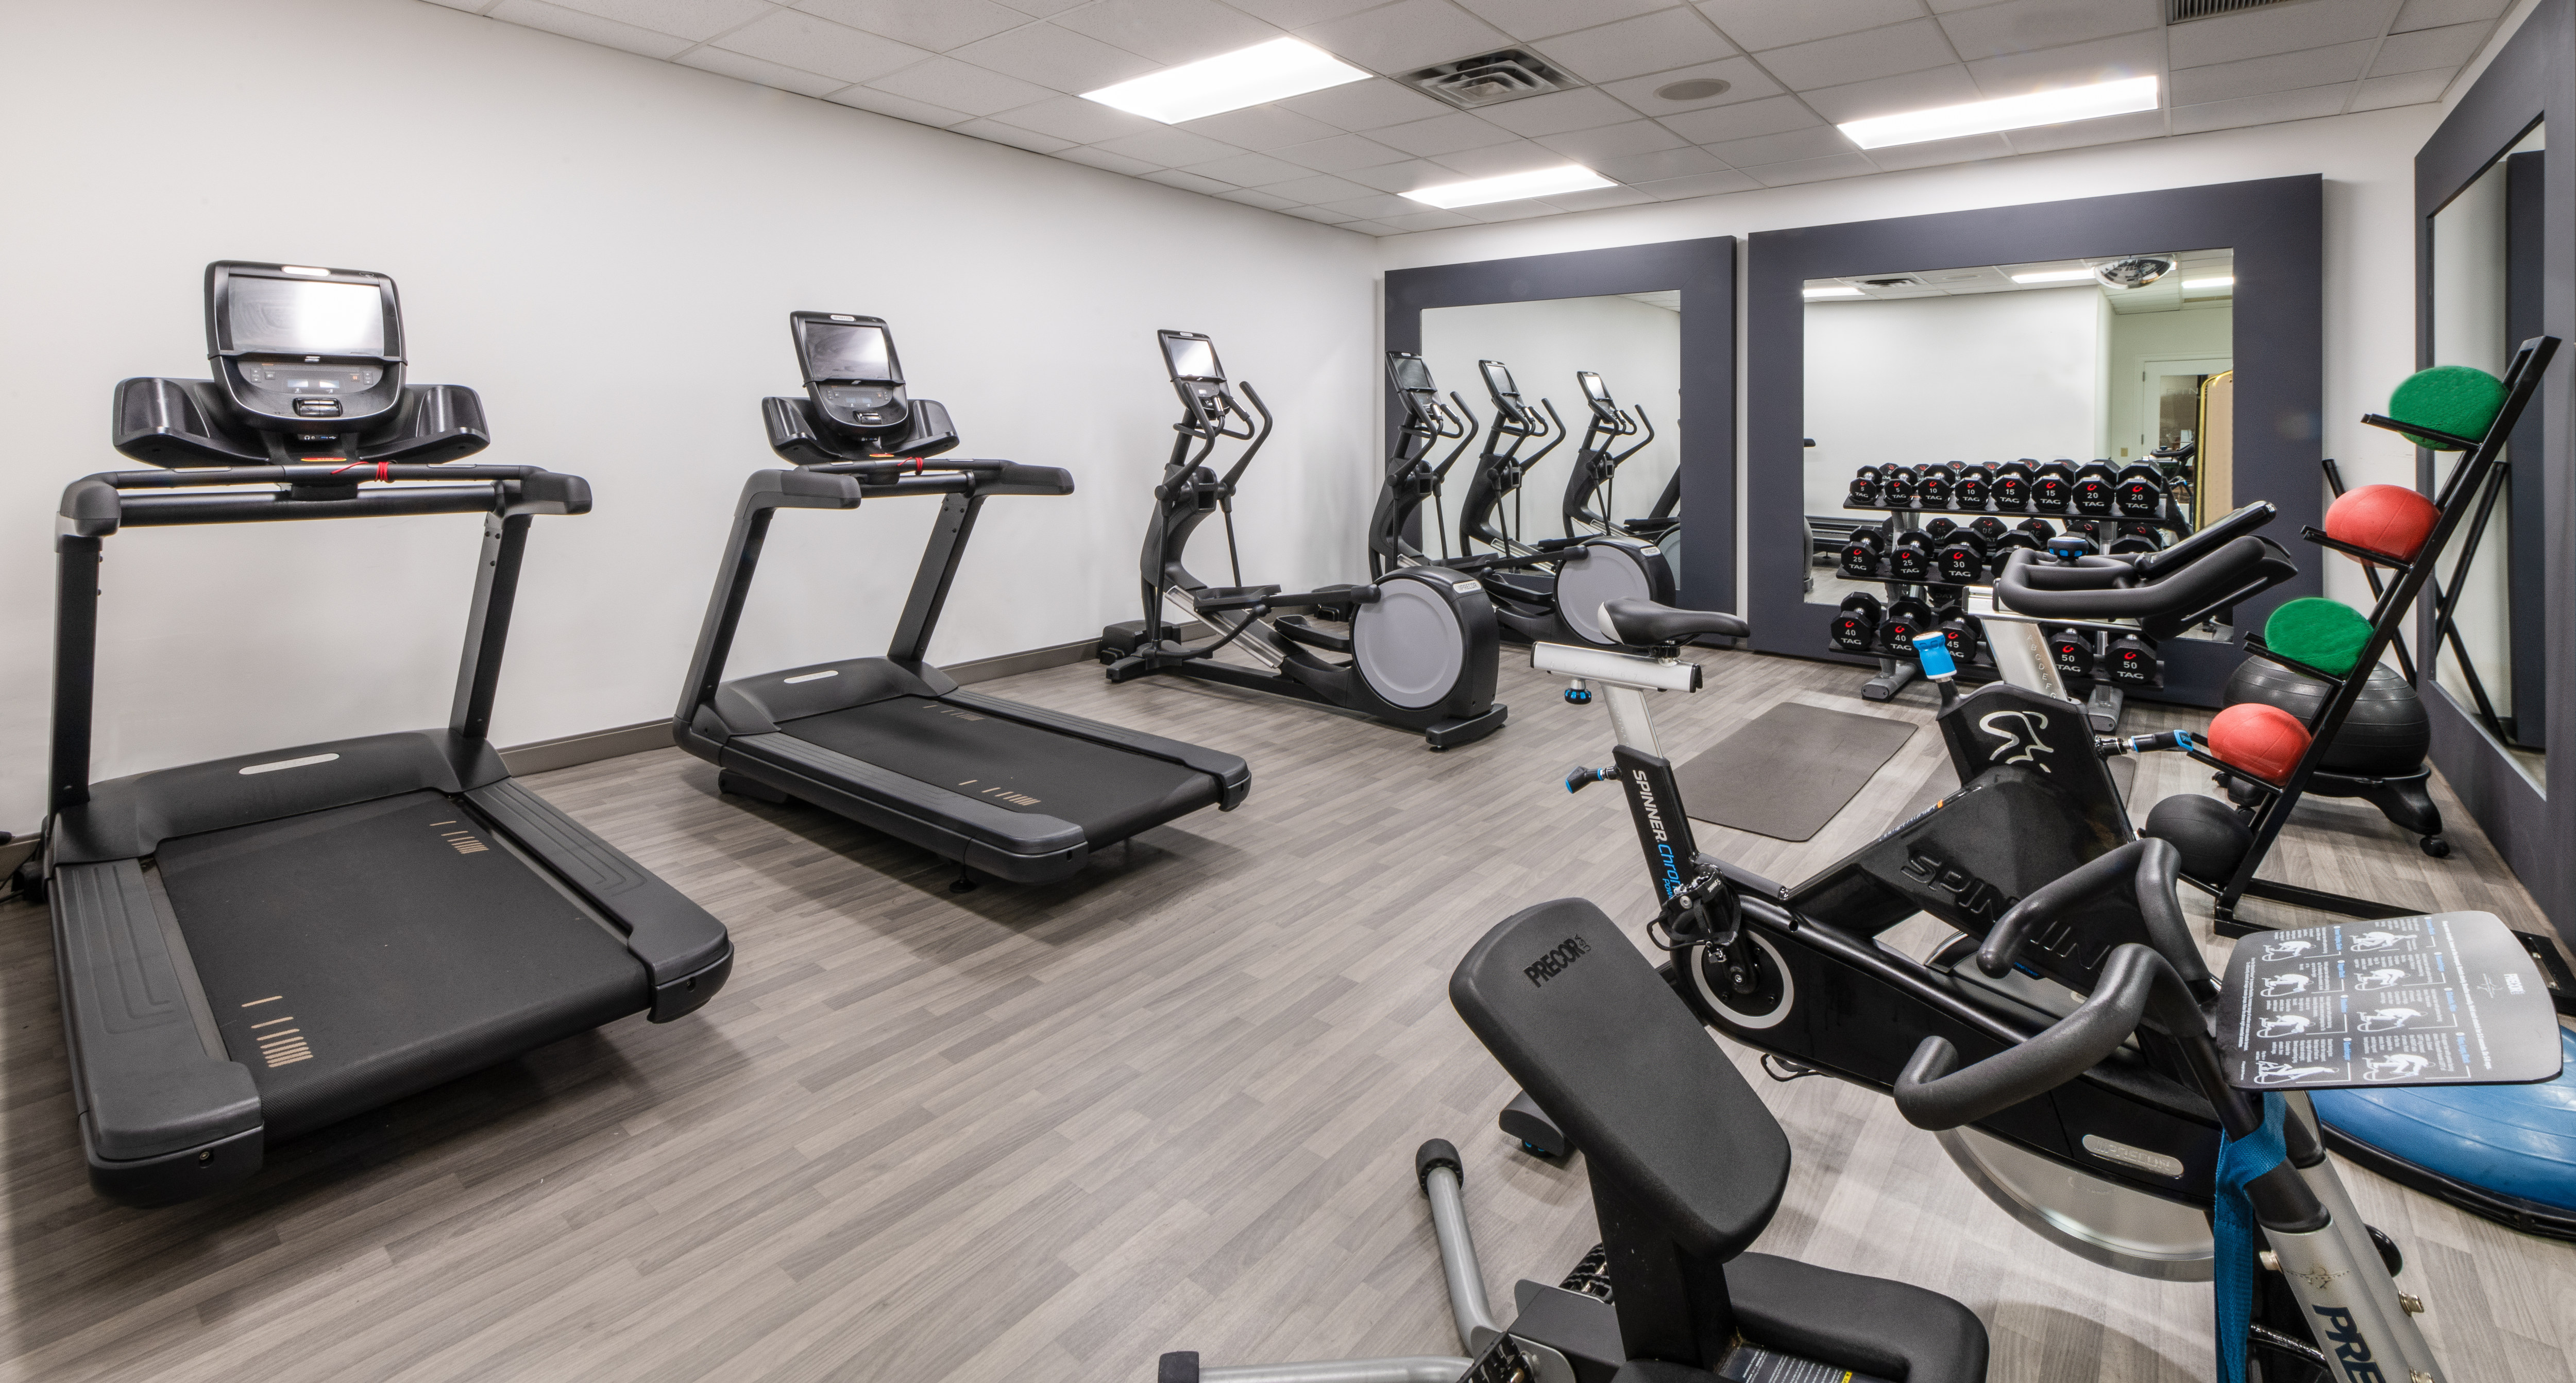 Fitness Center with Recumbent Bikes Treadmills and Weights